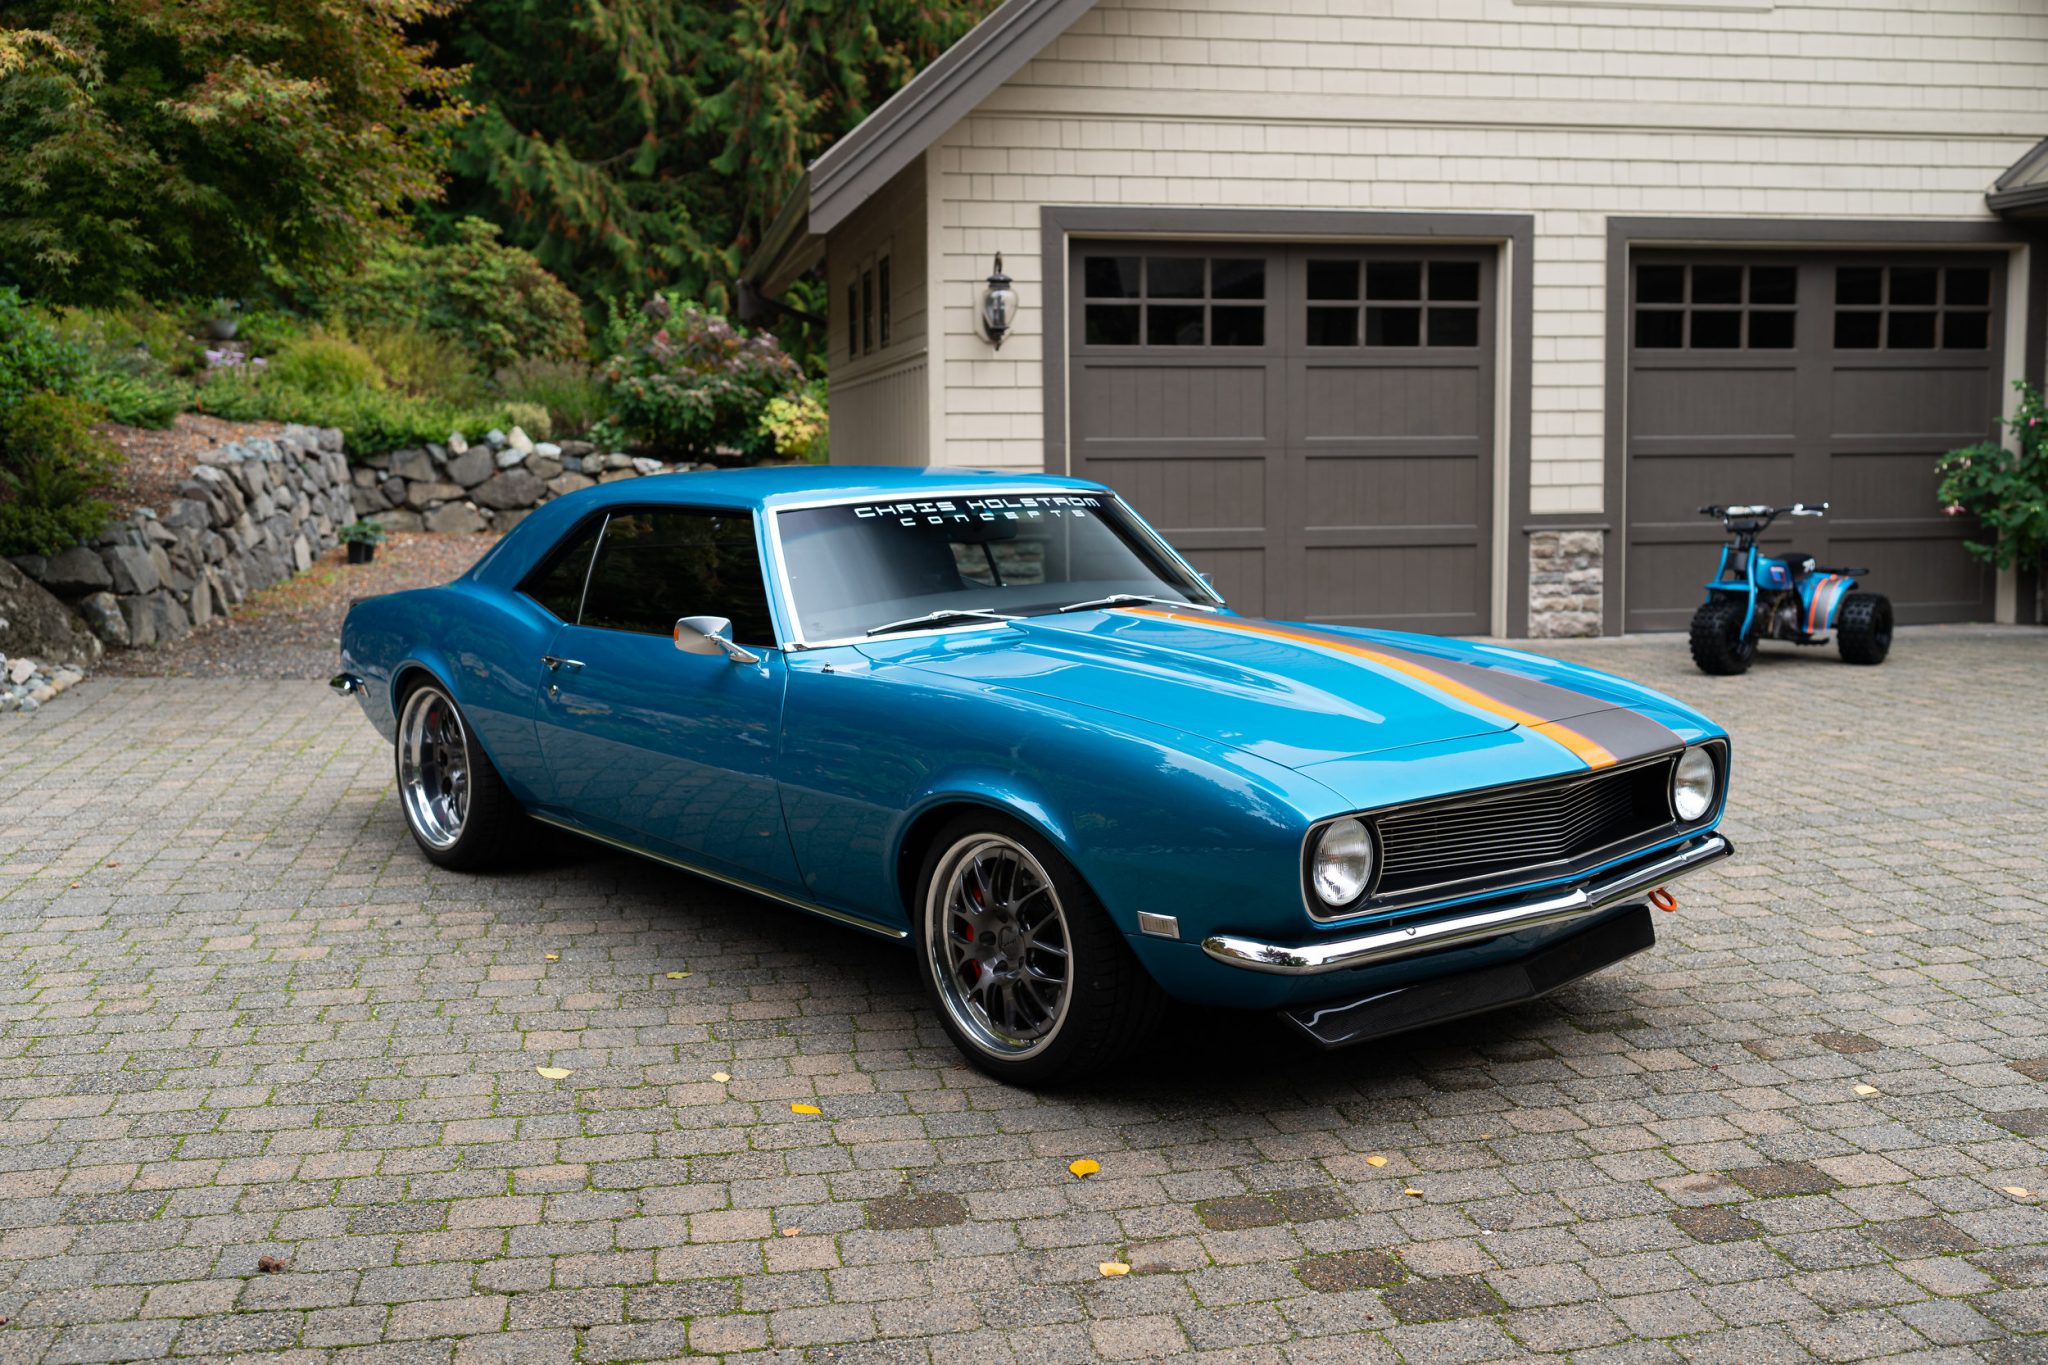 This Modified Award-Winning 1968 Camaro Goes as a Bundle With a Unique  Honda ATV - autoevolution